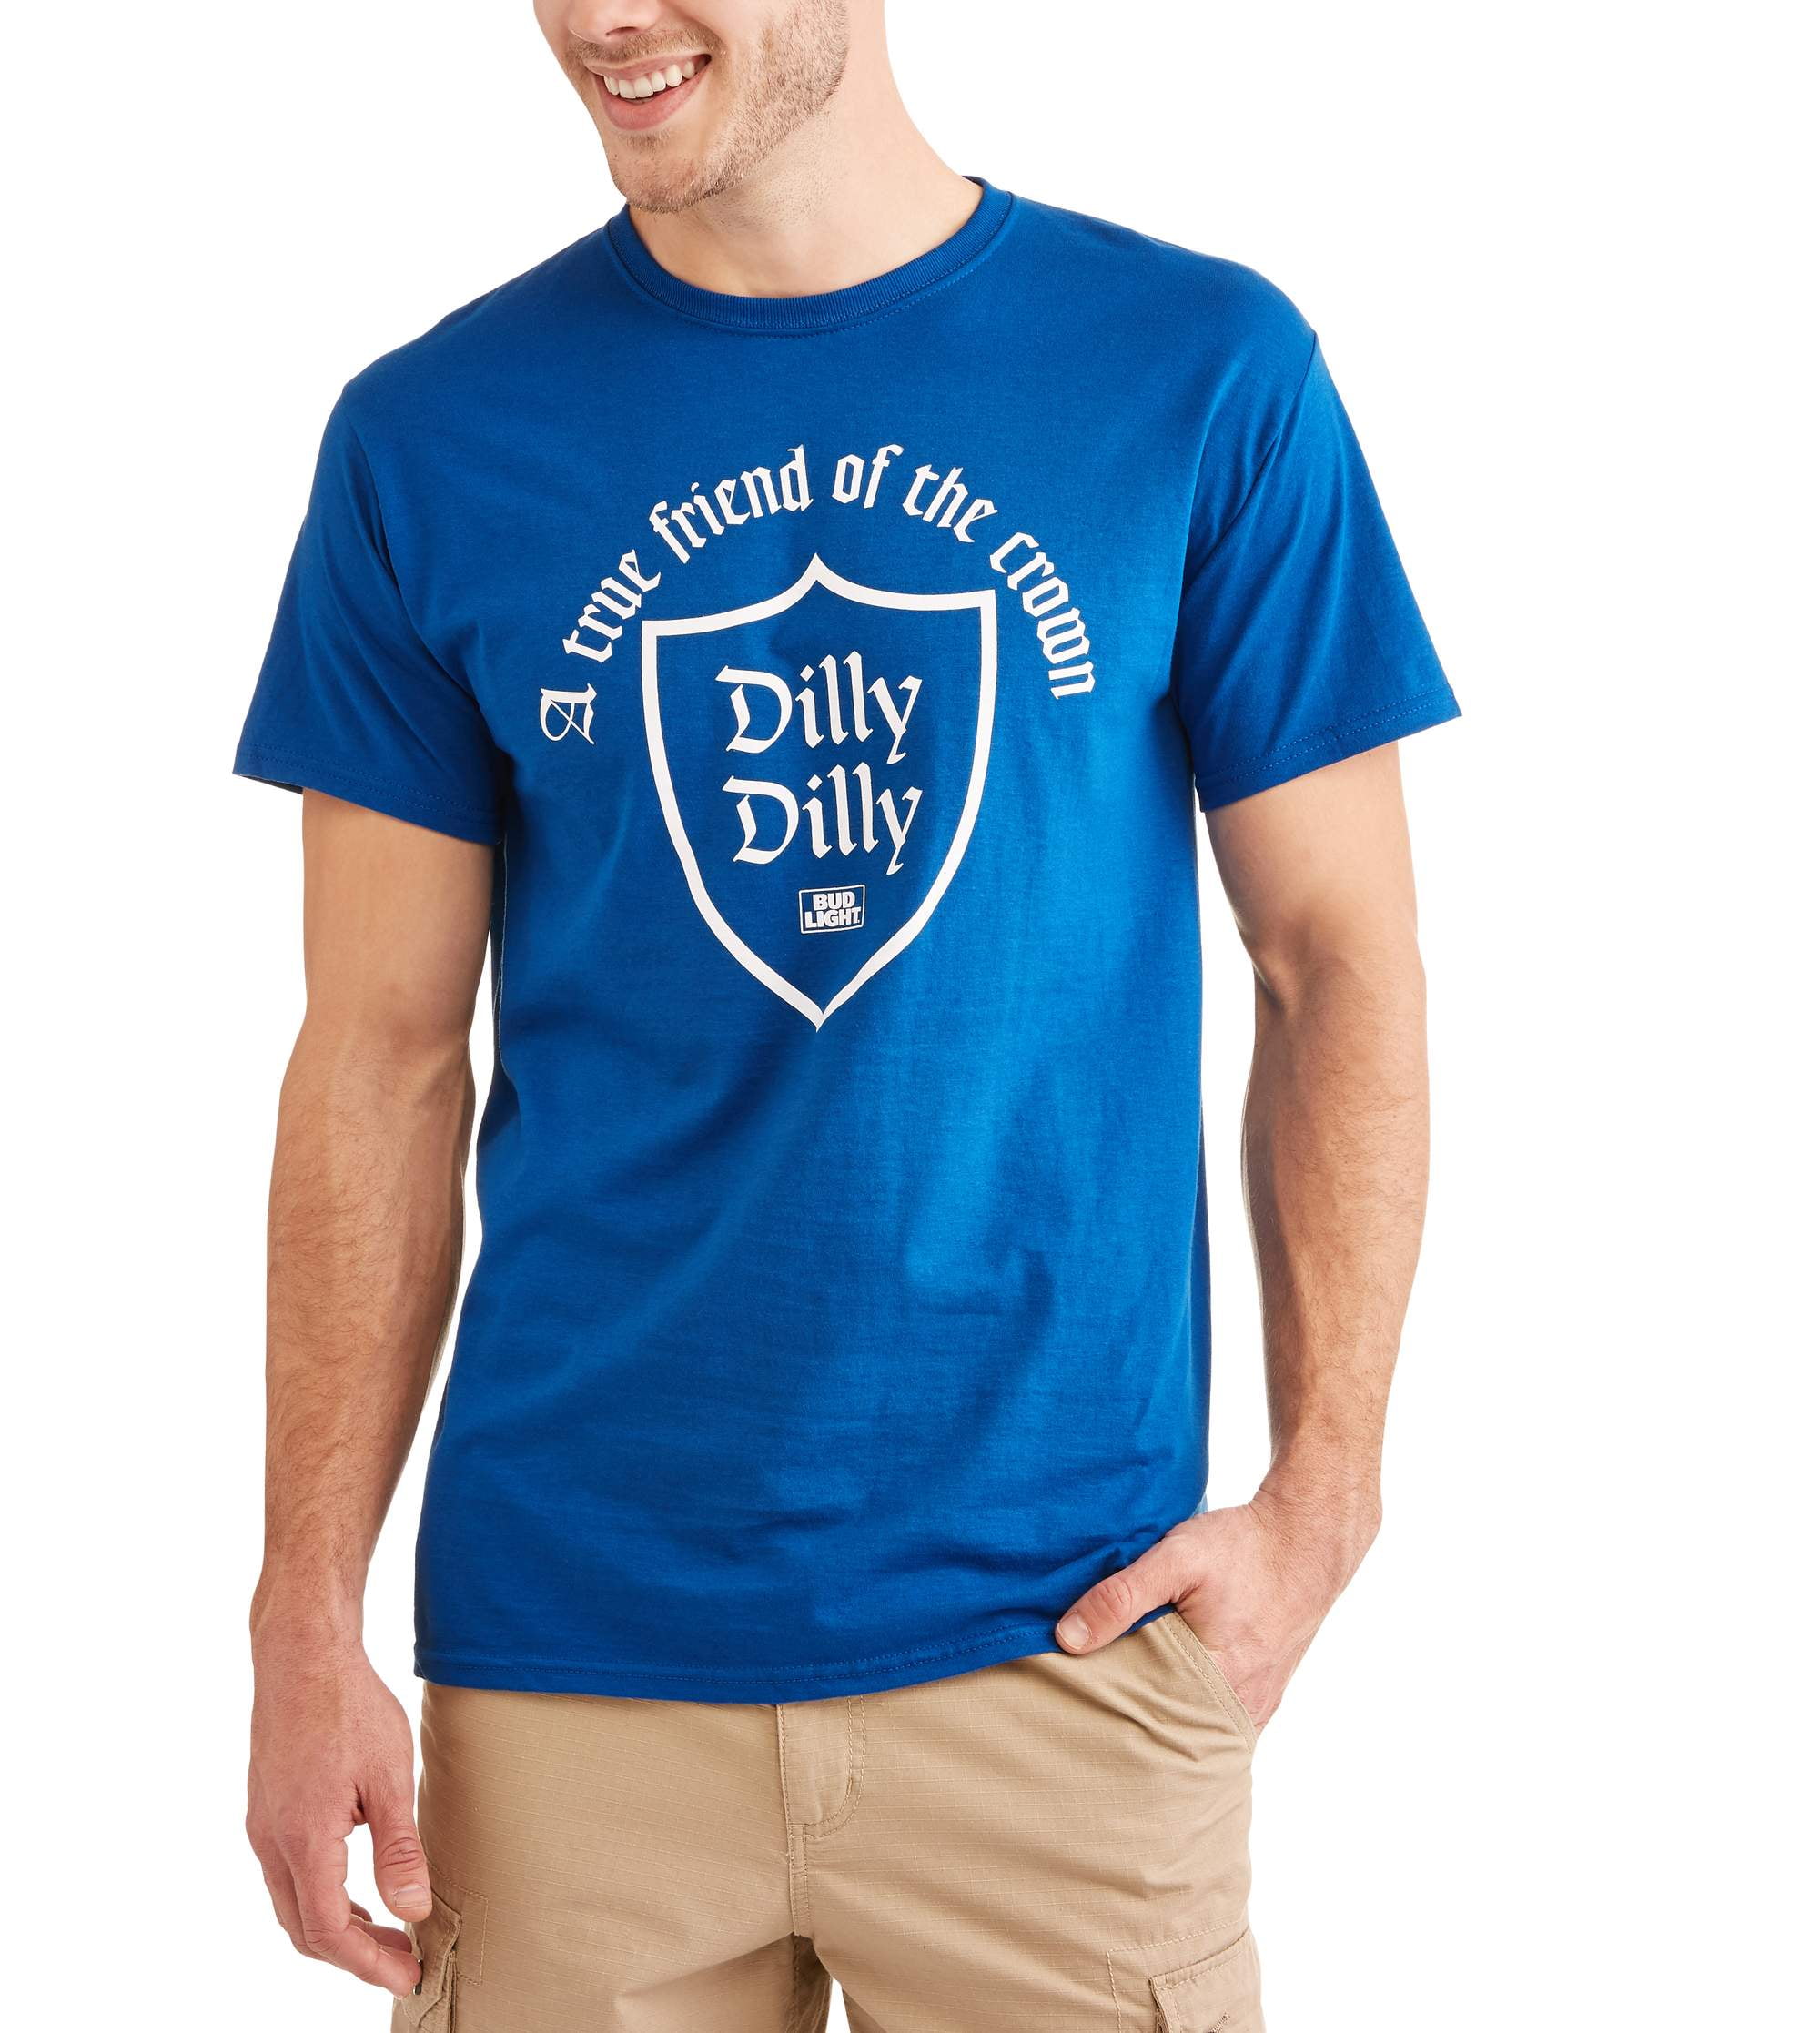 Bud Light Men's Dilly Dilly Friend Of The Crown T-Shirt - Walmart.com